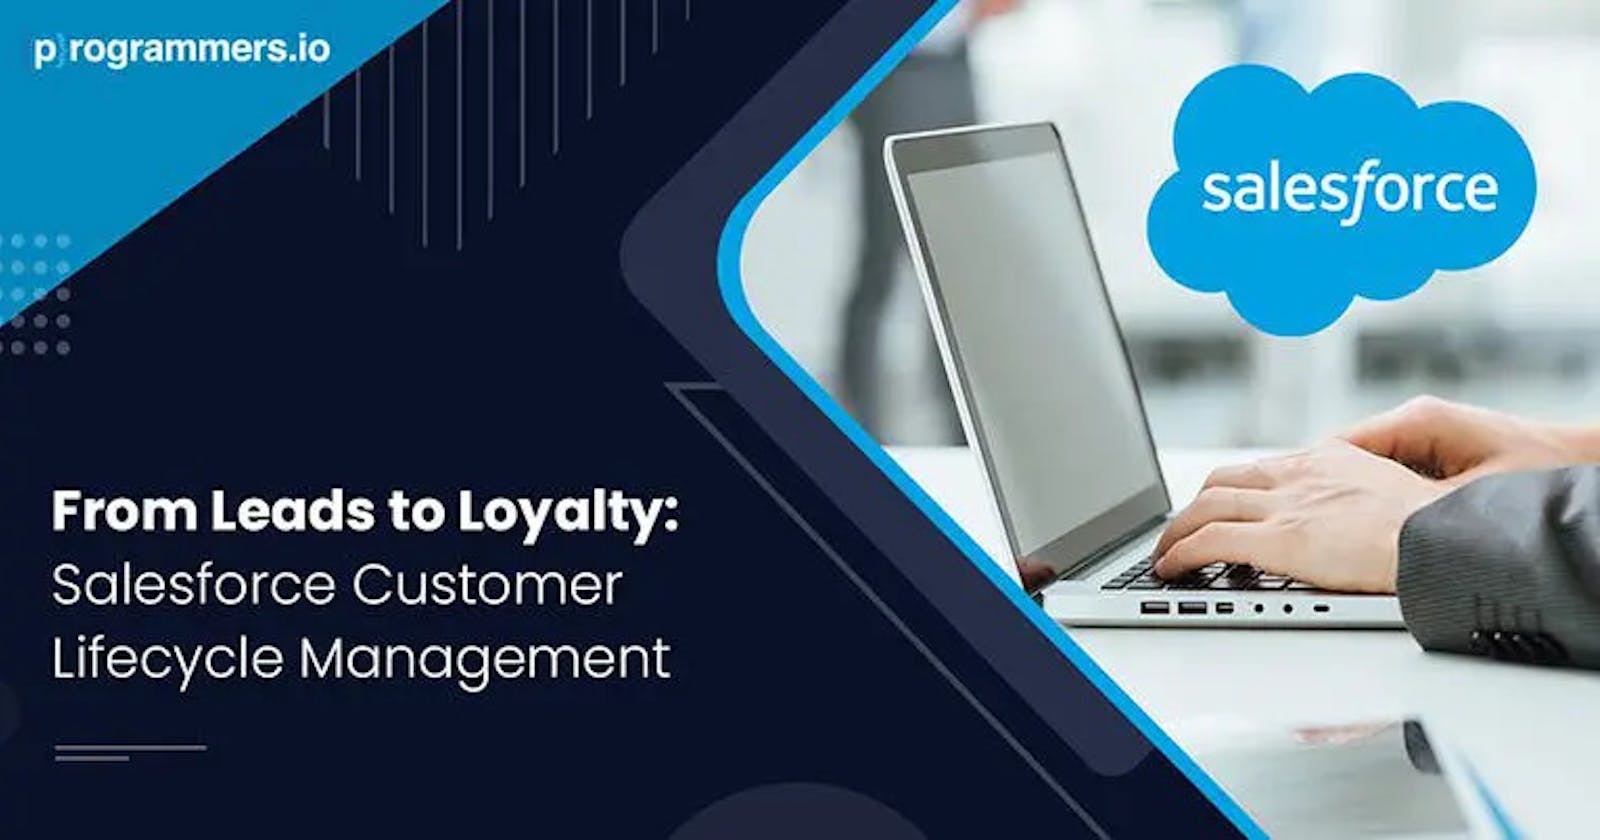 From Leads to Loyalty: Salesforce Marketing Cloud’s Role in Customer Lifecycle Management